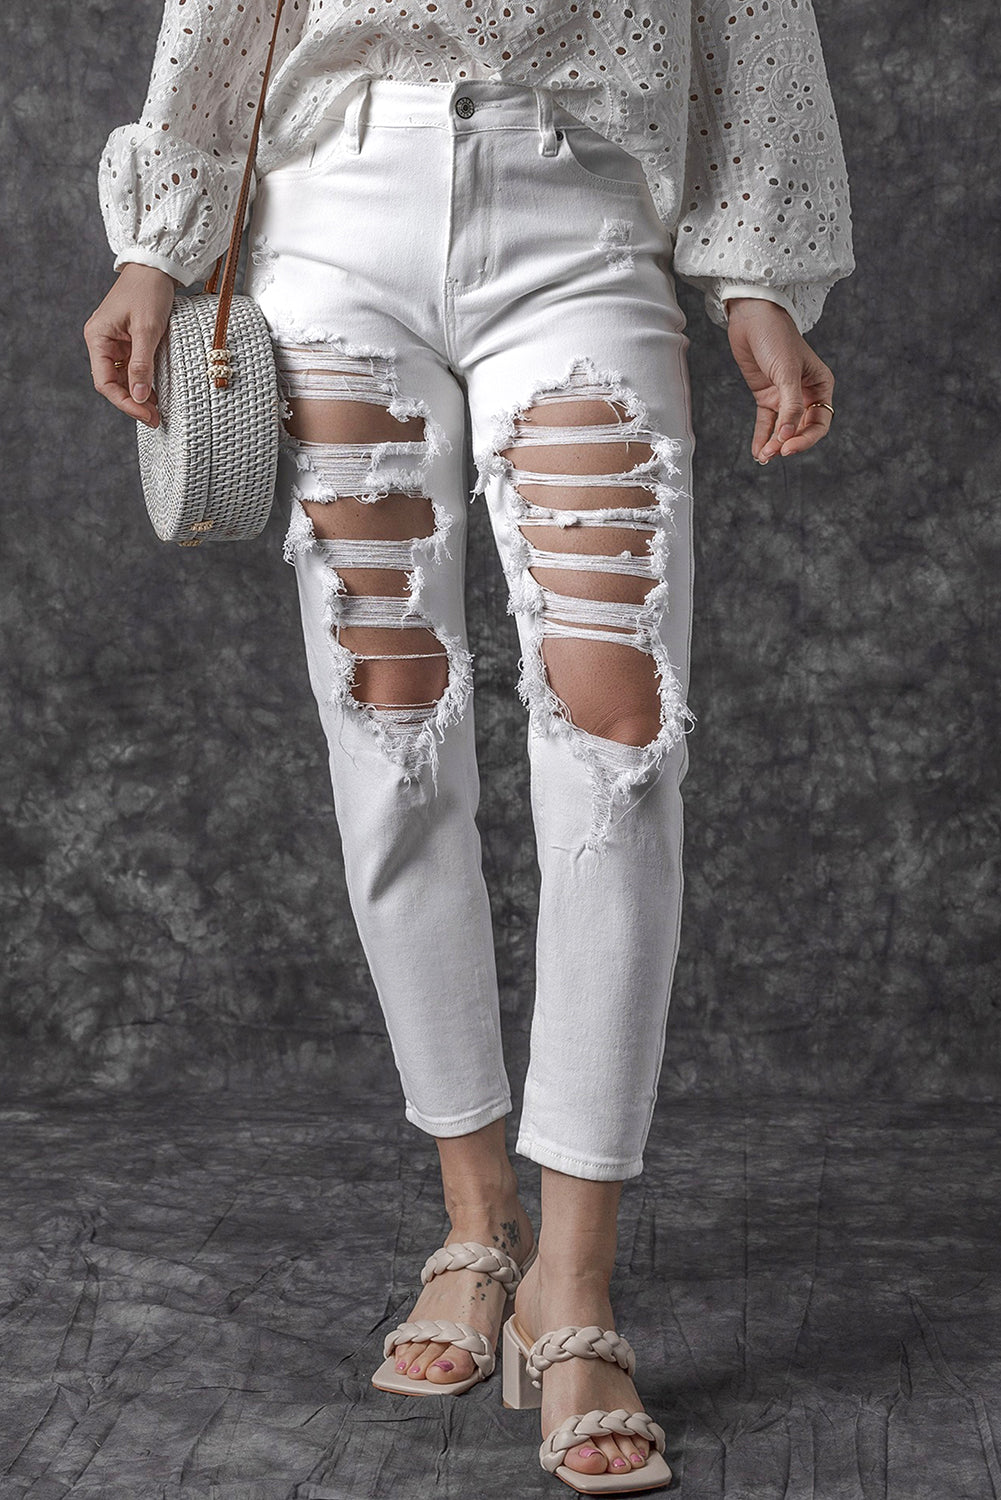 Distressed Jeans with Pockets - Ryzela